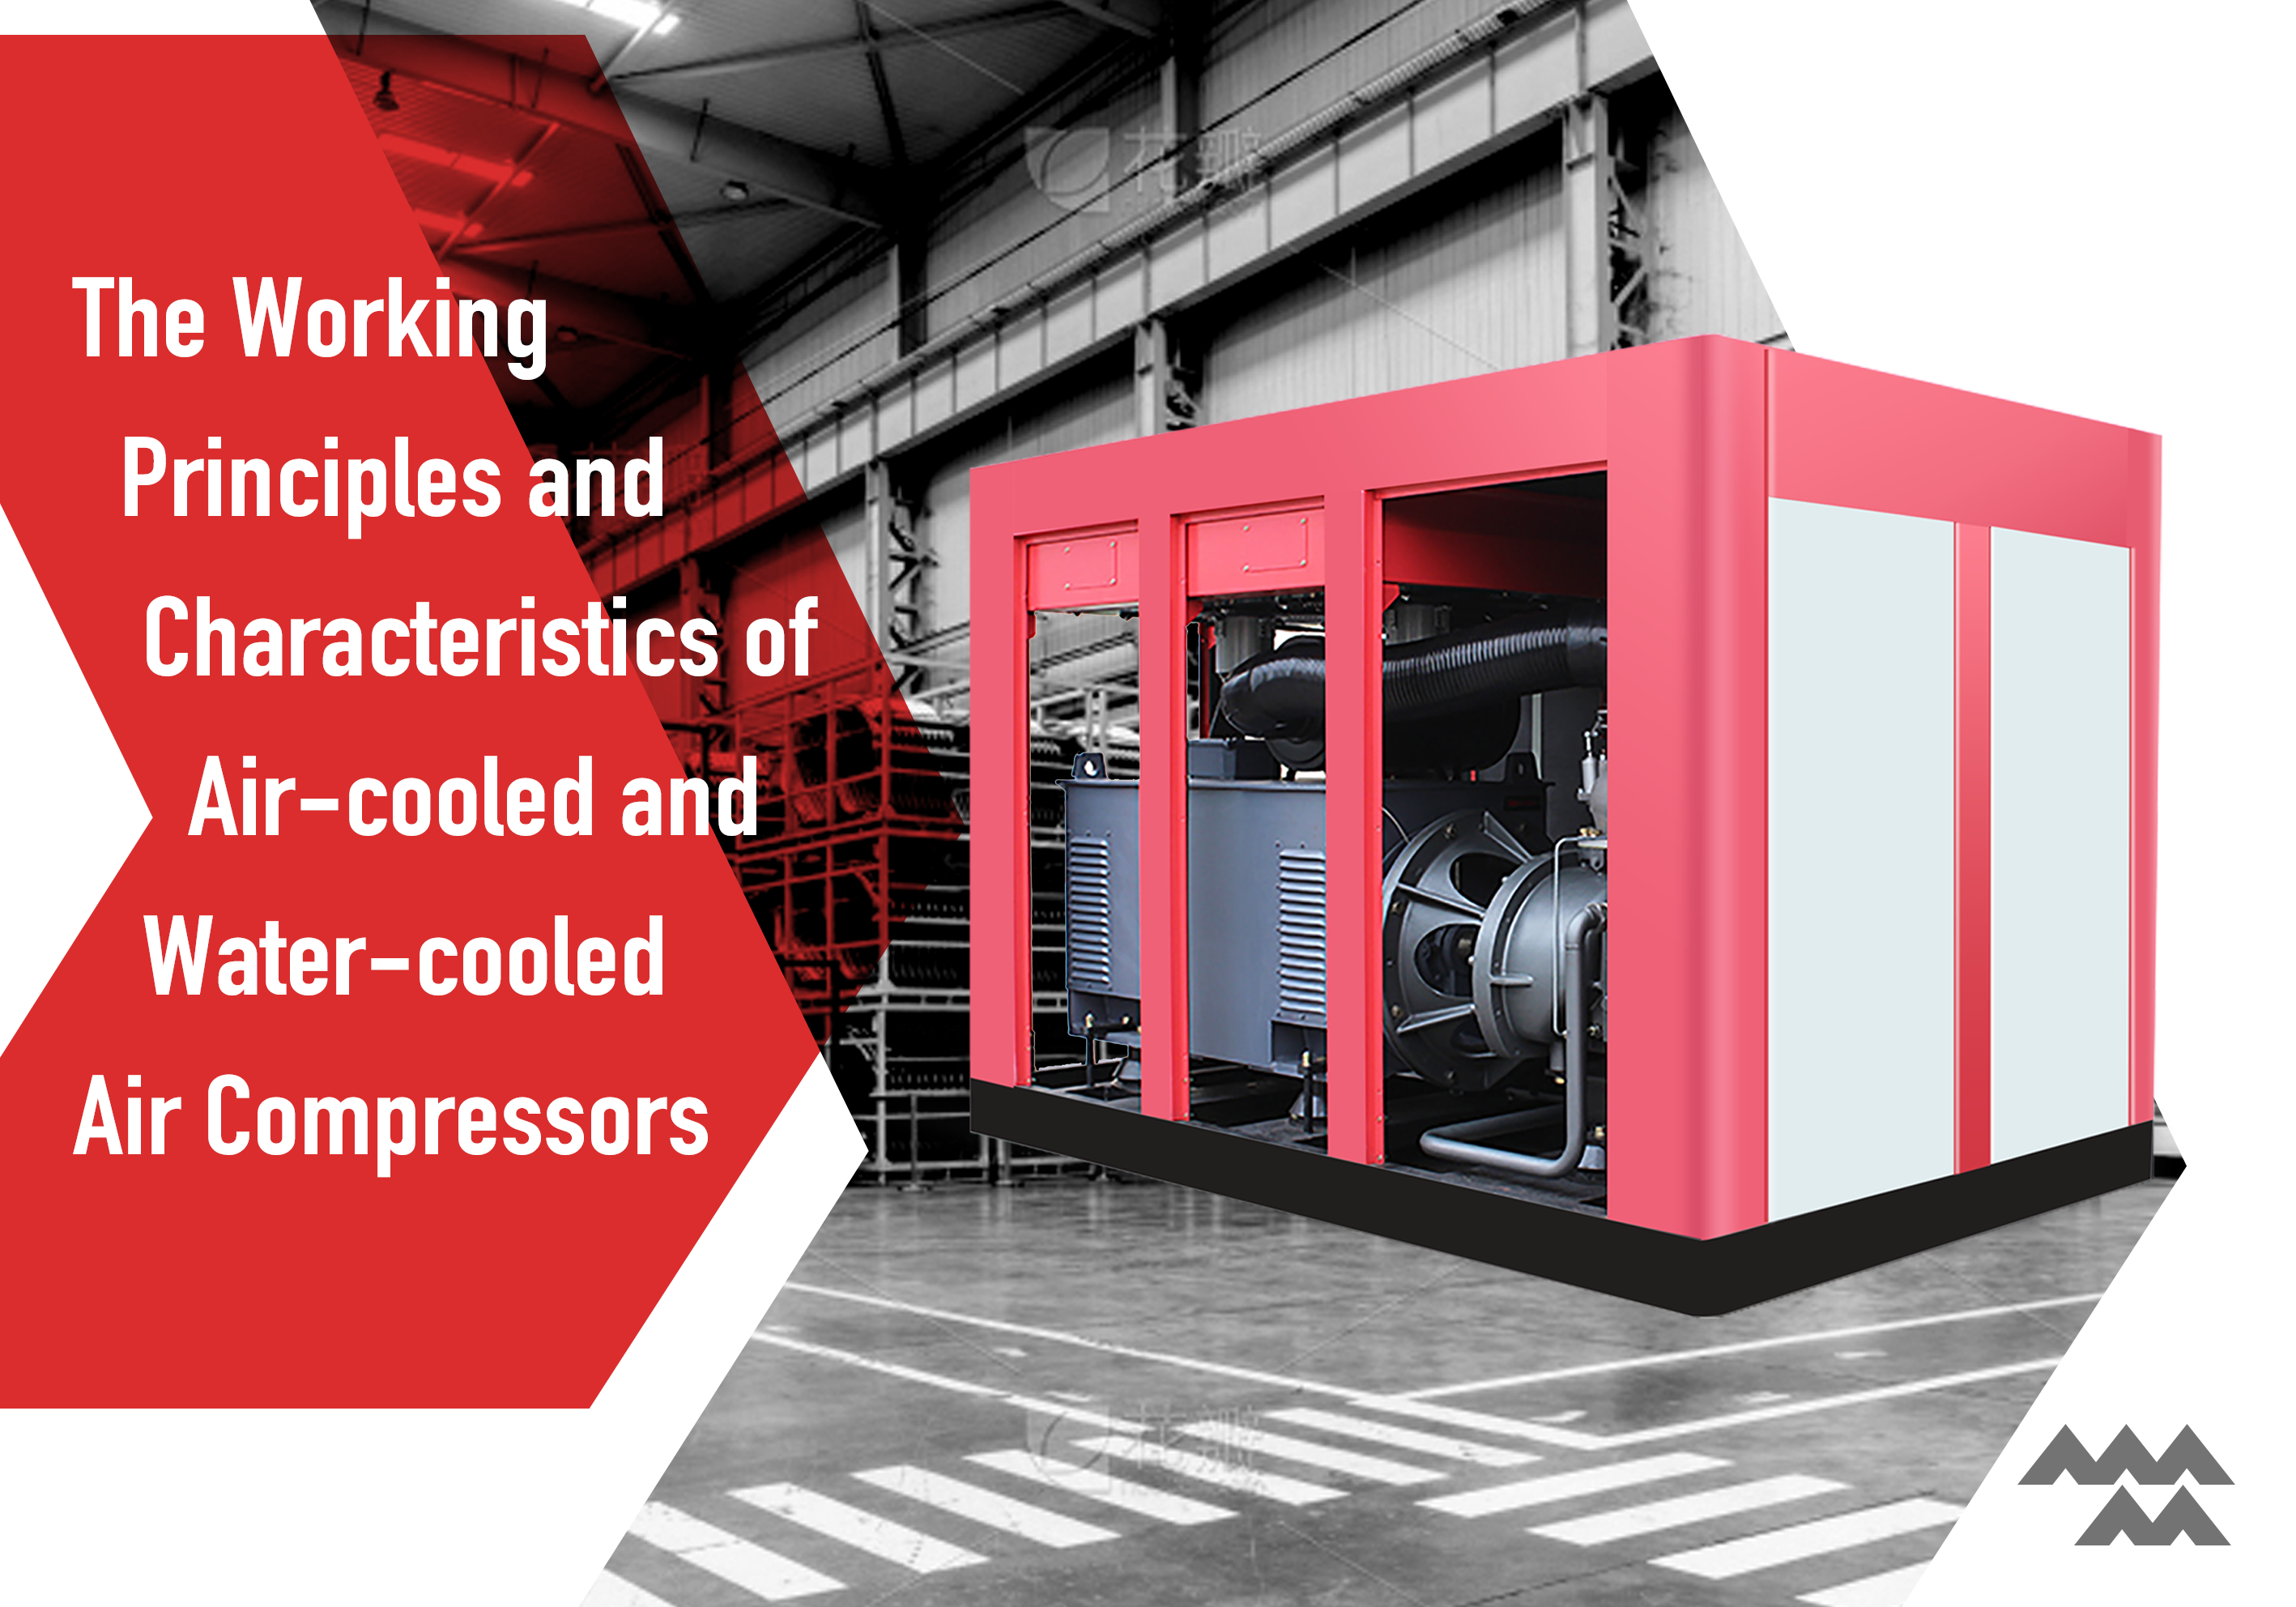 The working principles and characteristics of air cooled and water cooled air compressors